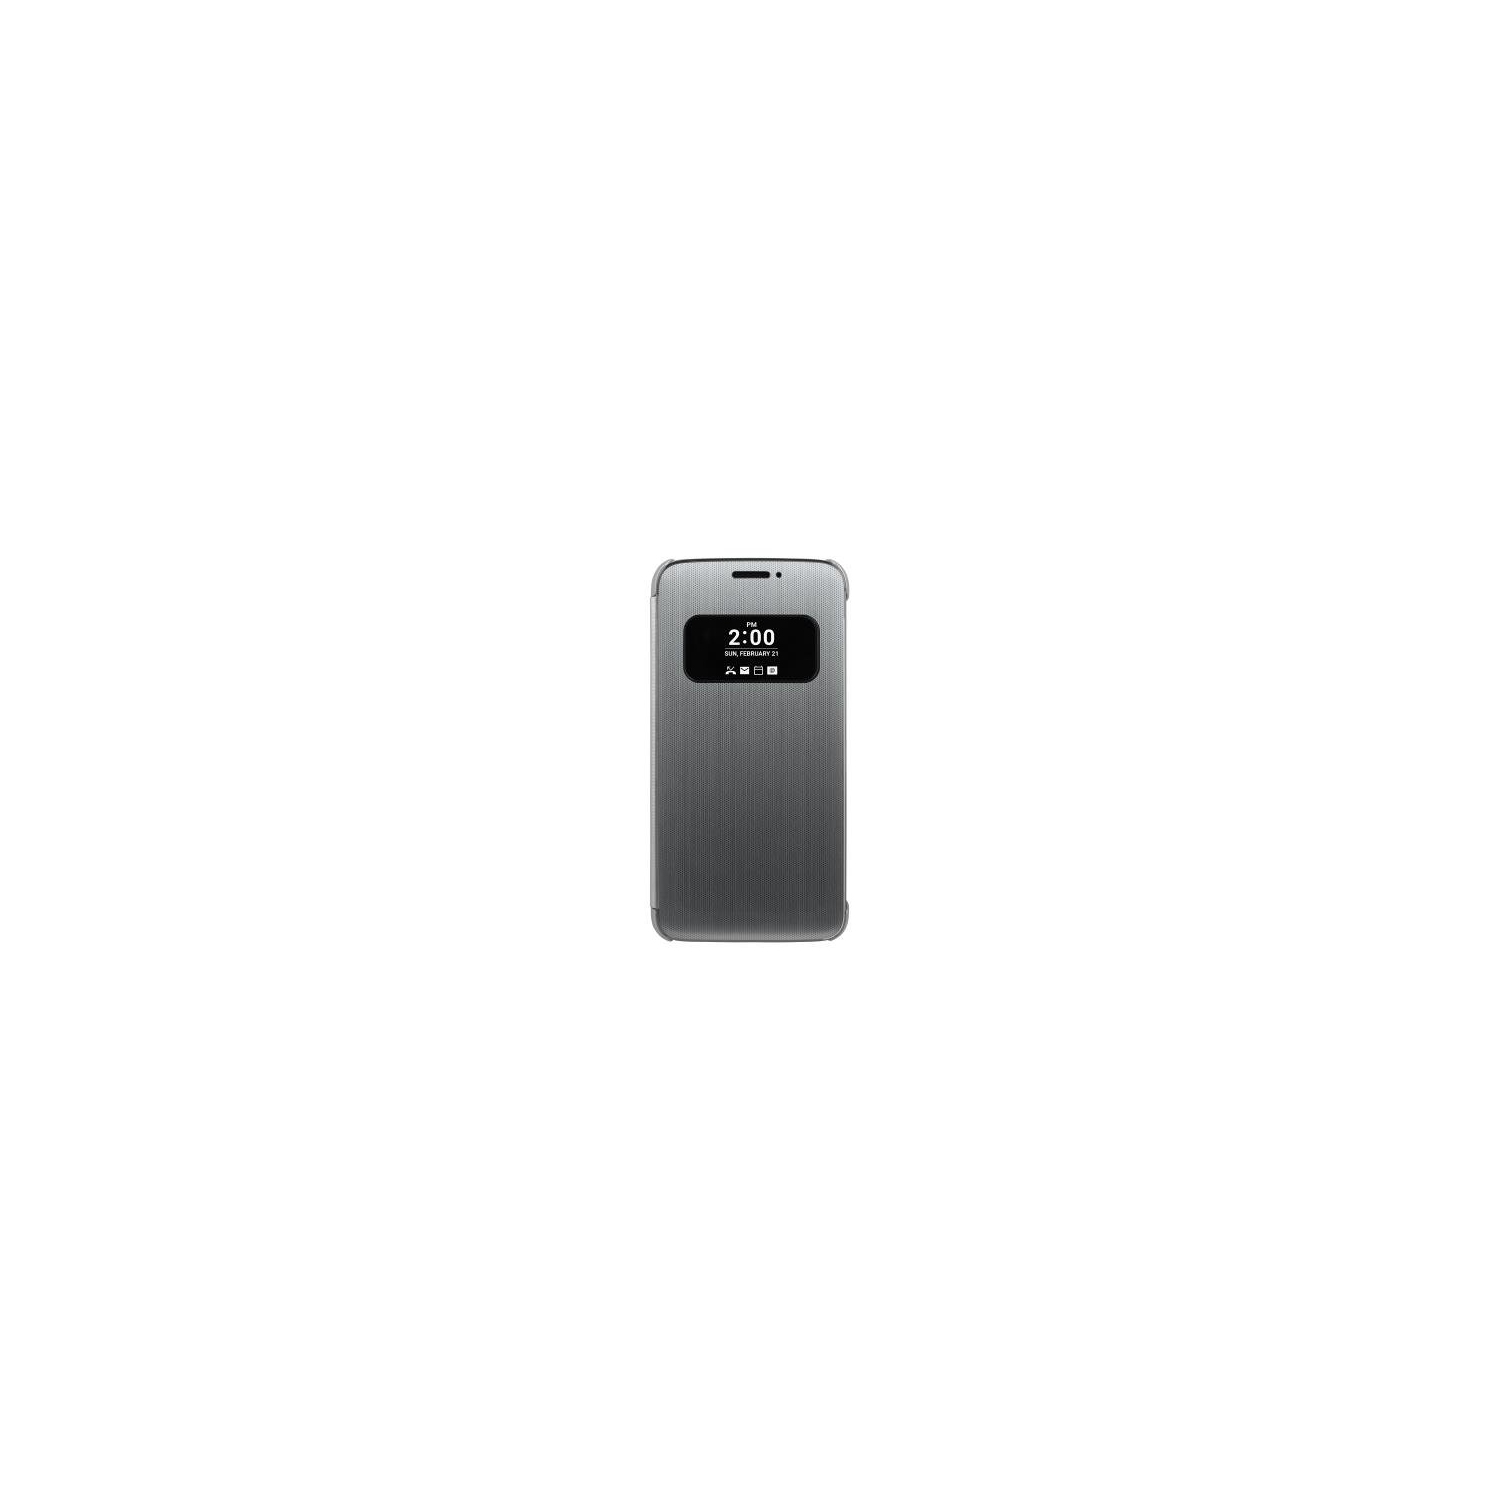 LG CFV160ACCATB Case for G5, Retail Packaging, Titan